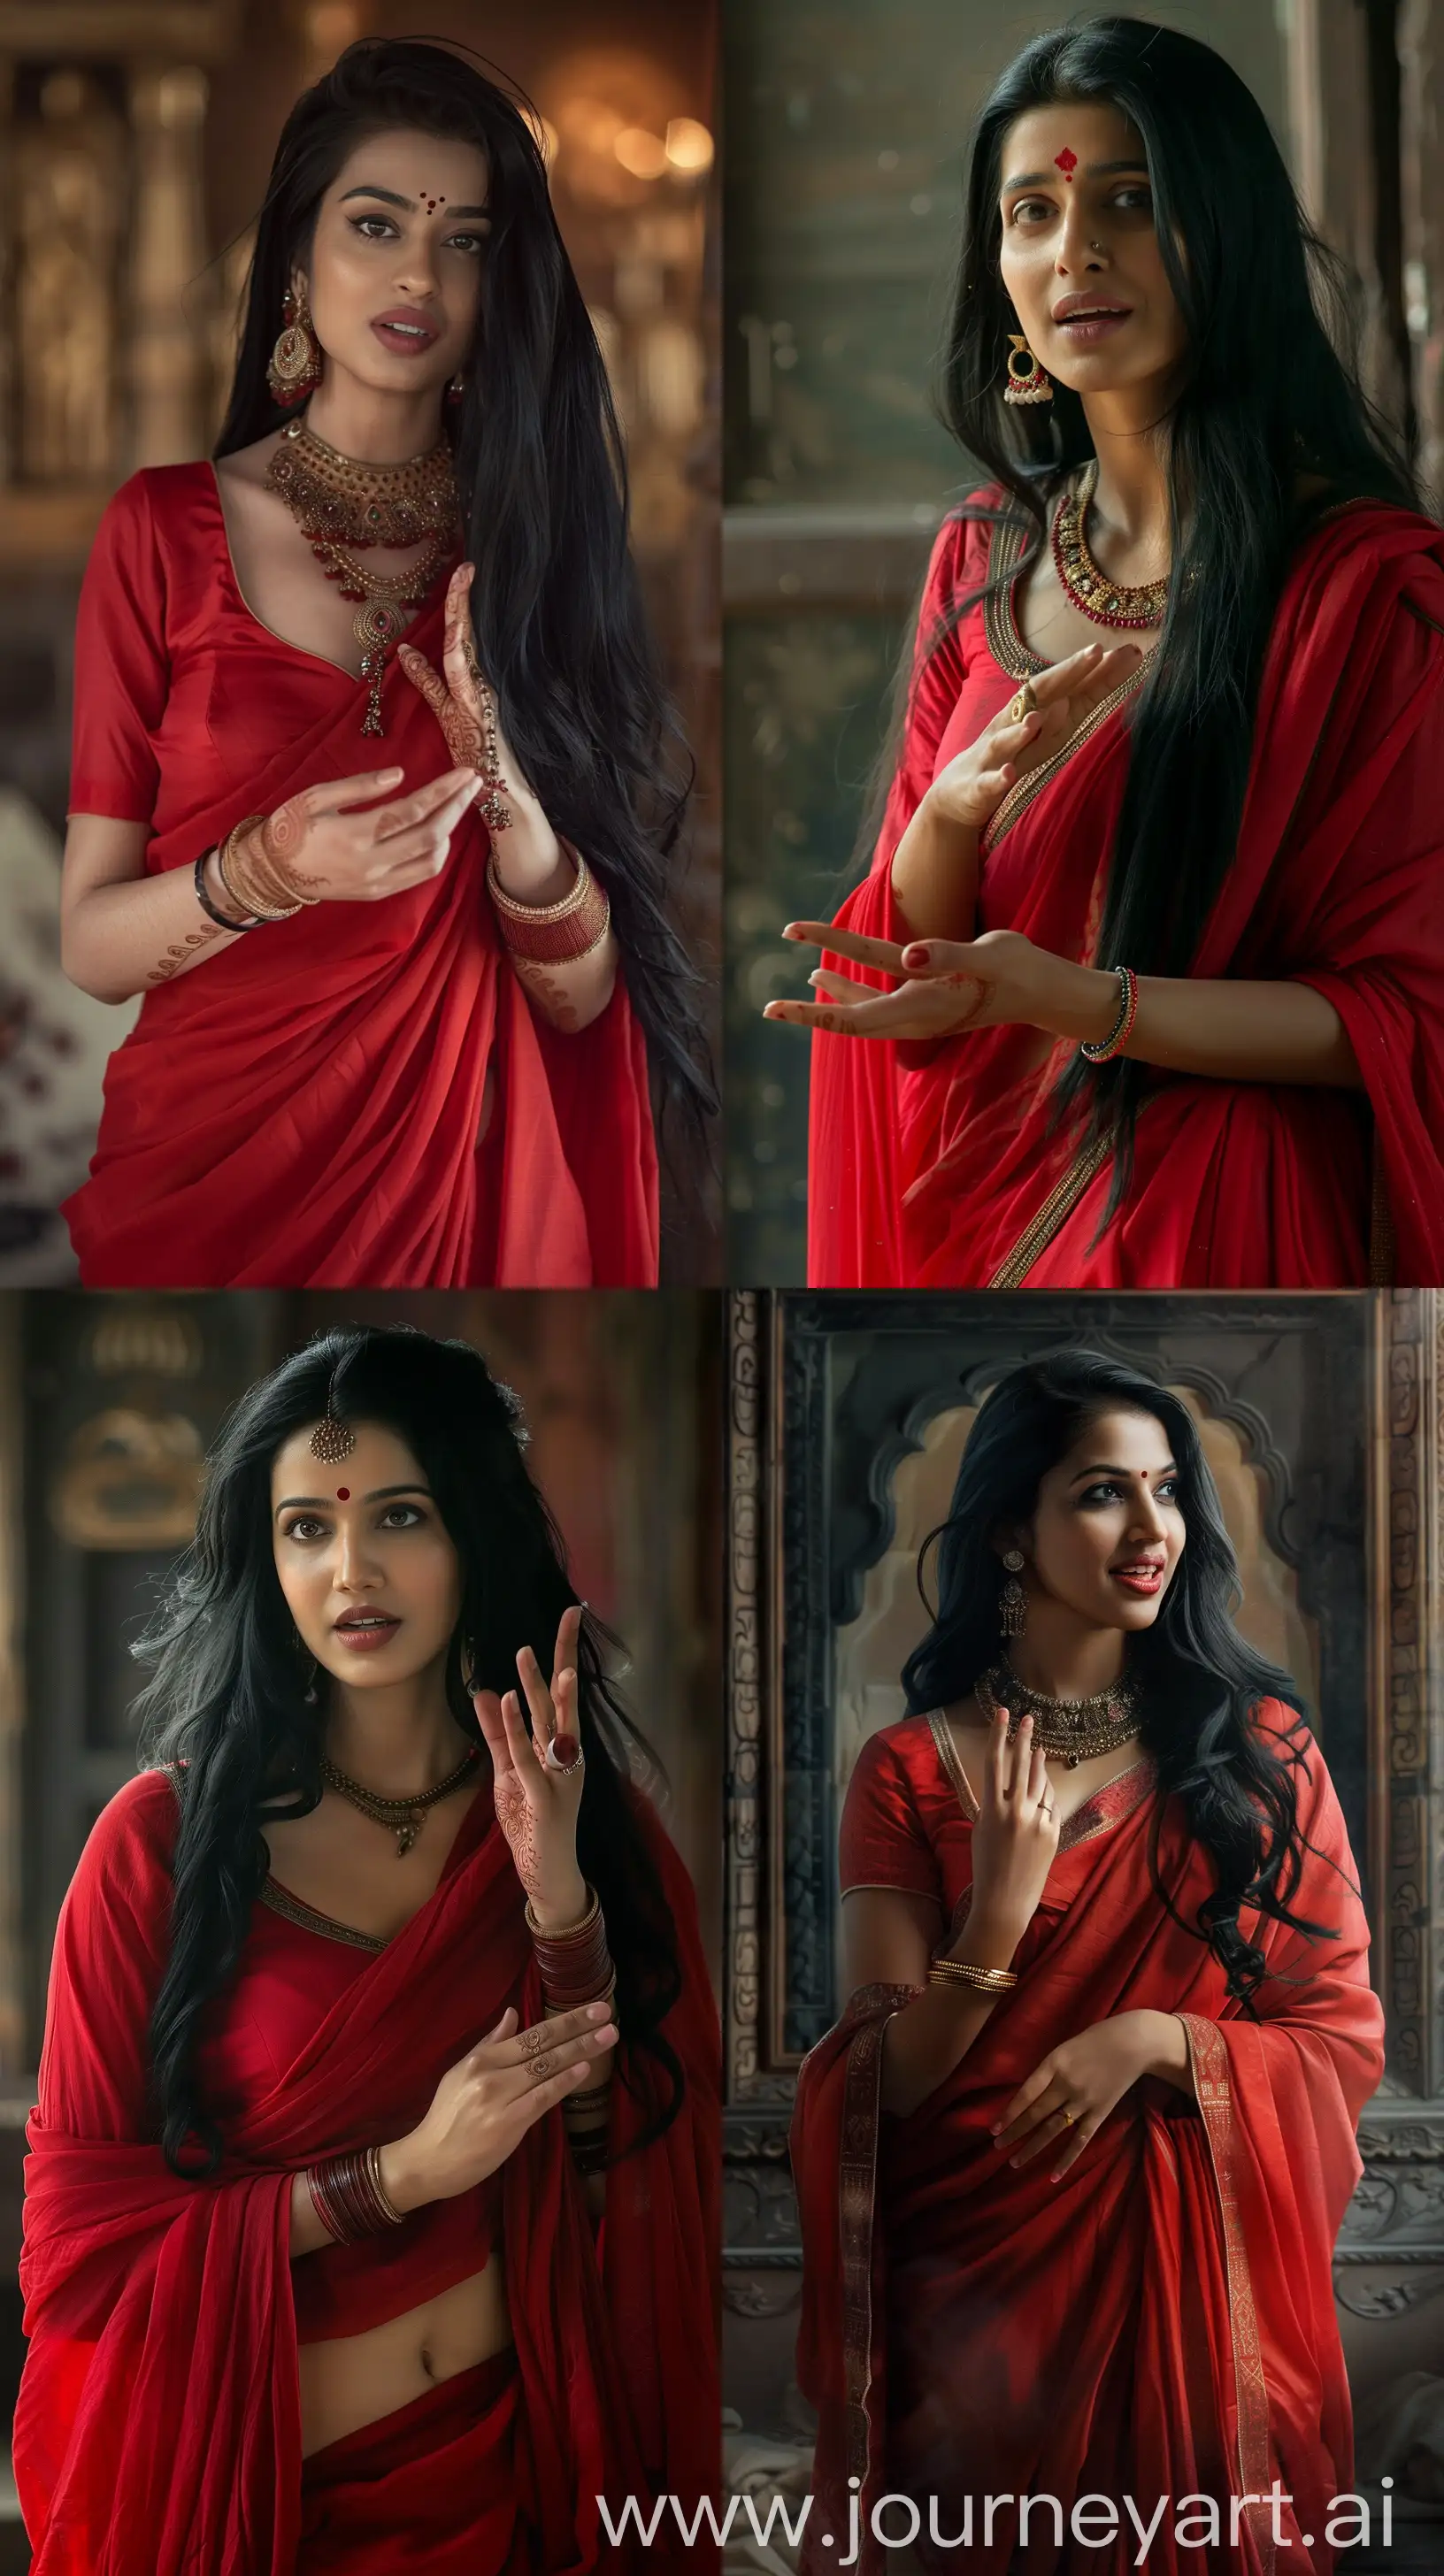 Ancient-Indian-Woman-in-Red-Saree-Elegant-Conversation-in-High-Resolution